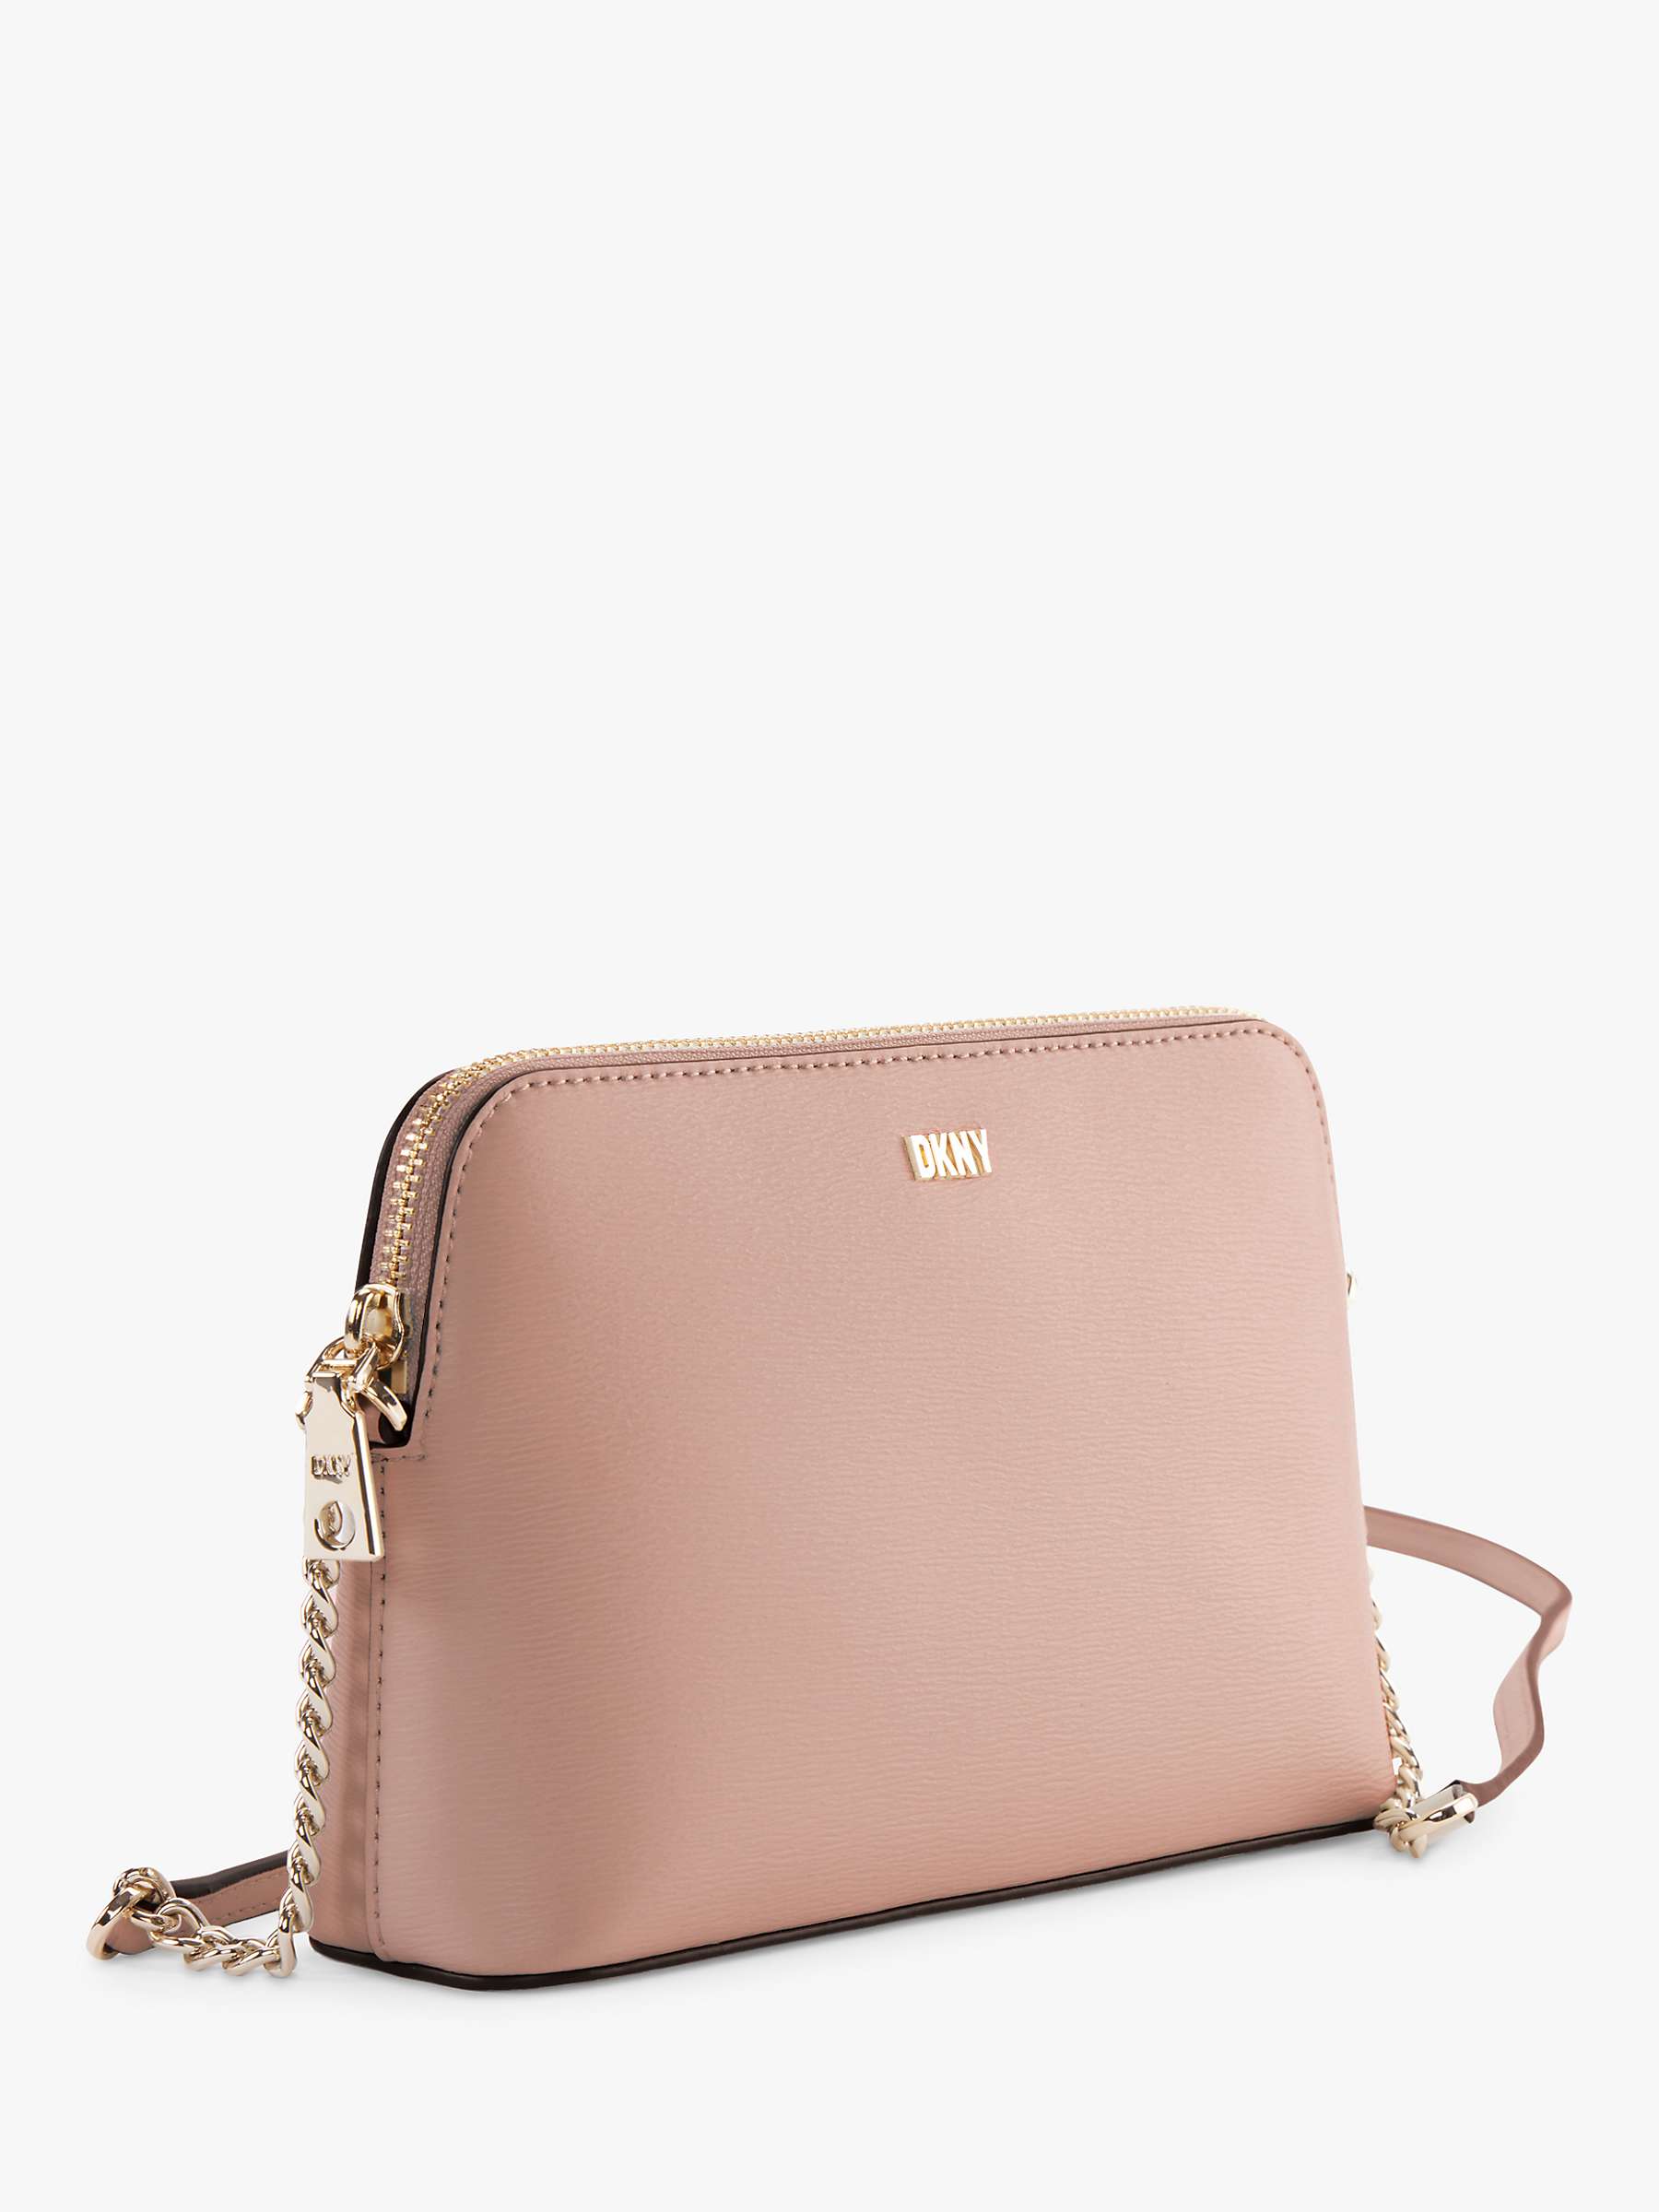 Buy DKNY Bryant Leather Dome Cross Body Bag, Cameo Online at johnlewis.com